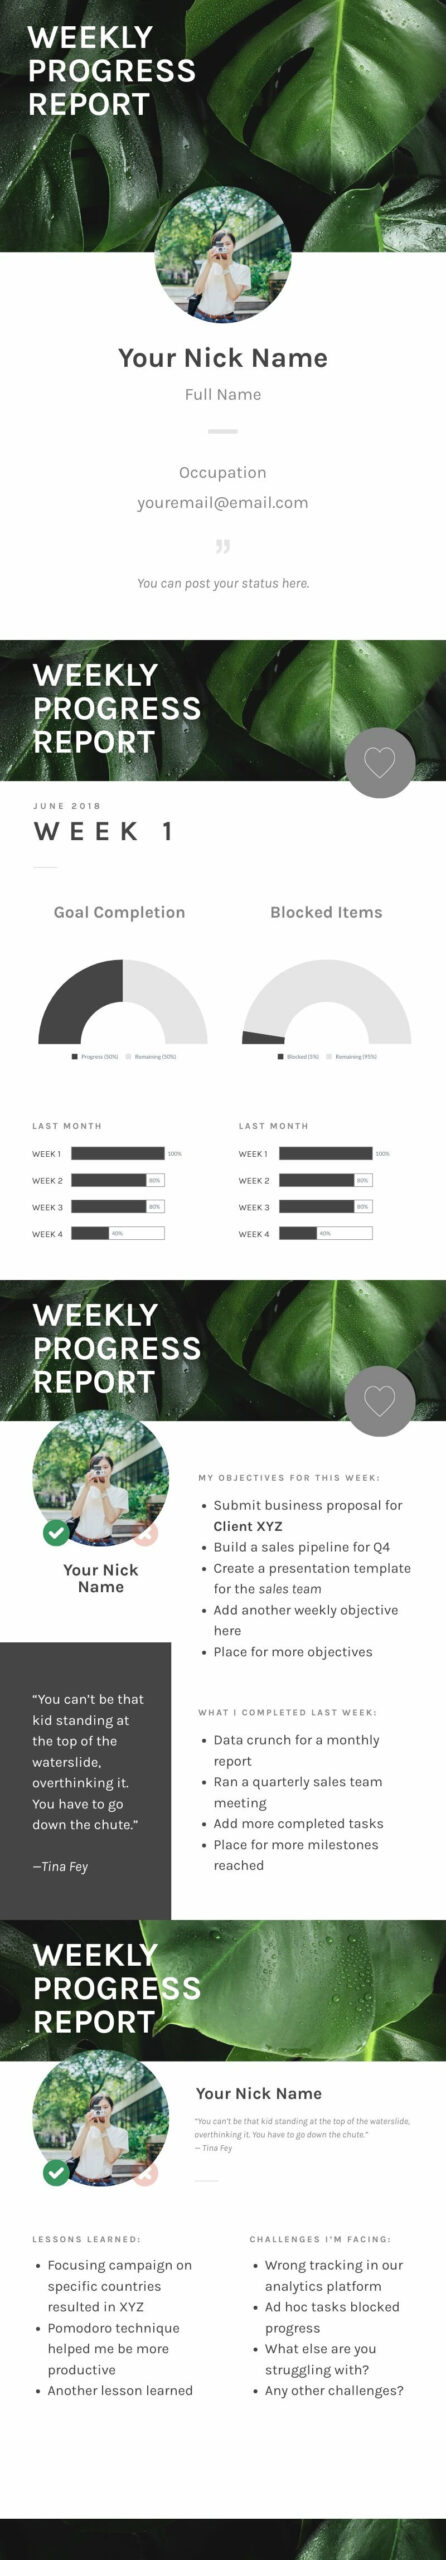 editable template for weekly progress reports 